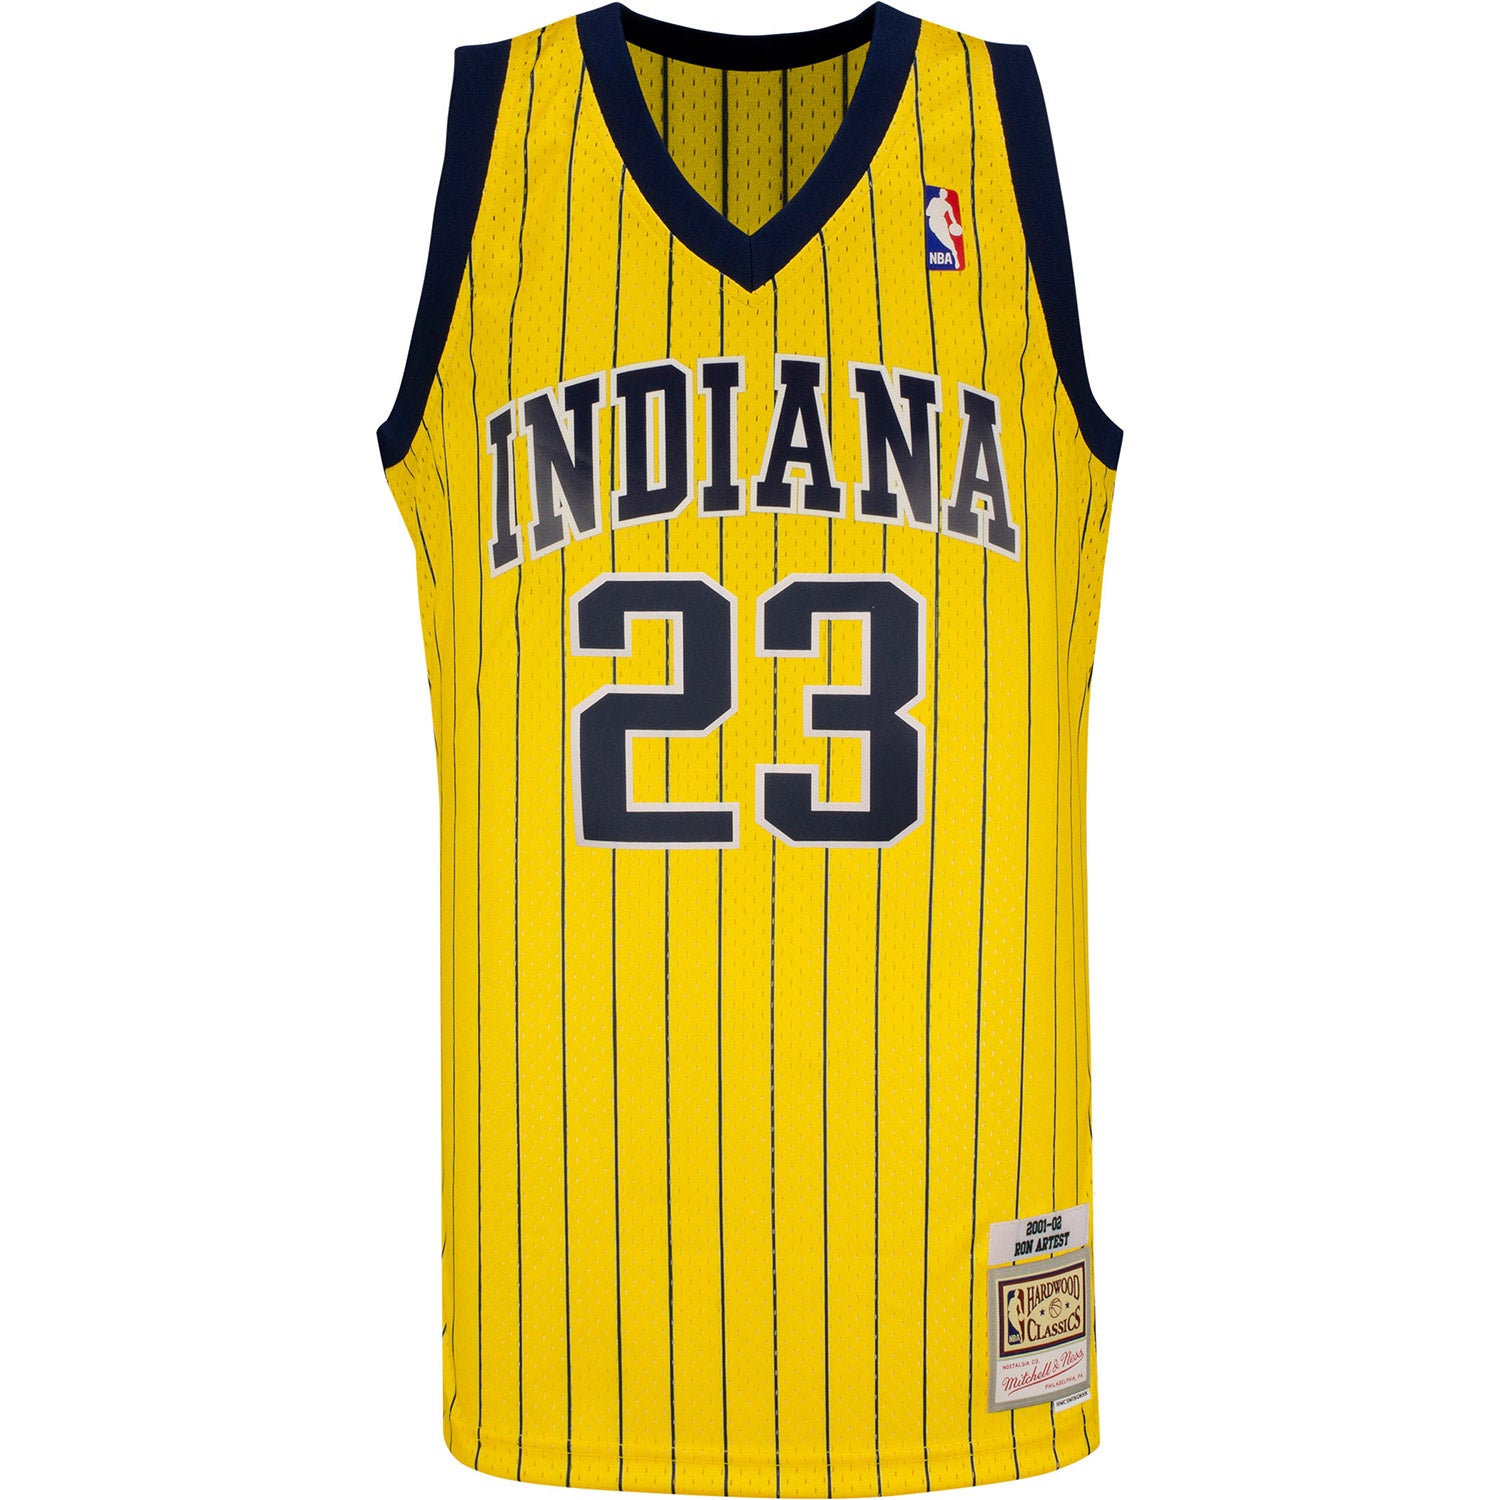 Indiana Pacers Home Uniform  Indiana pacers, Best basketball jersey design,  Indiana